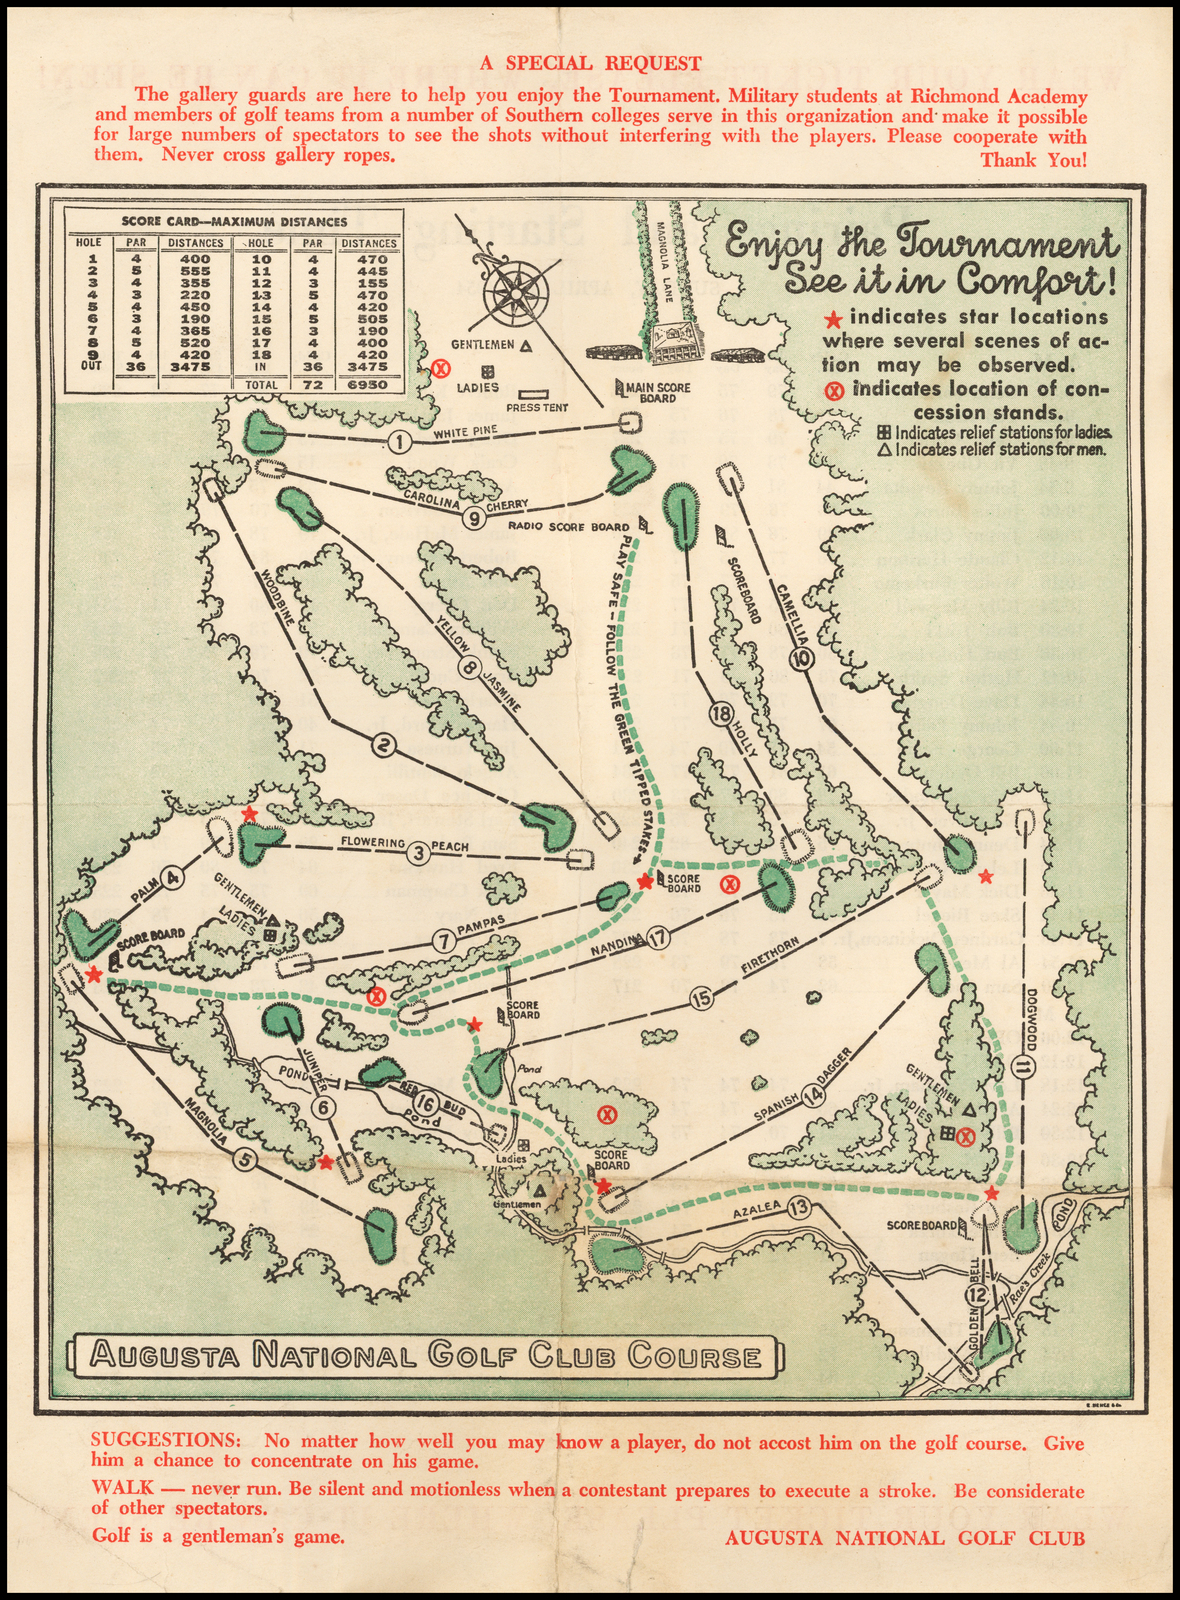 Augusta National Golf Club Course Barry Lawrence 